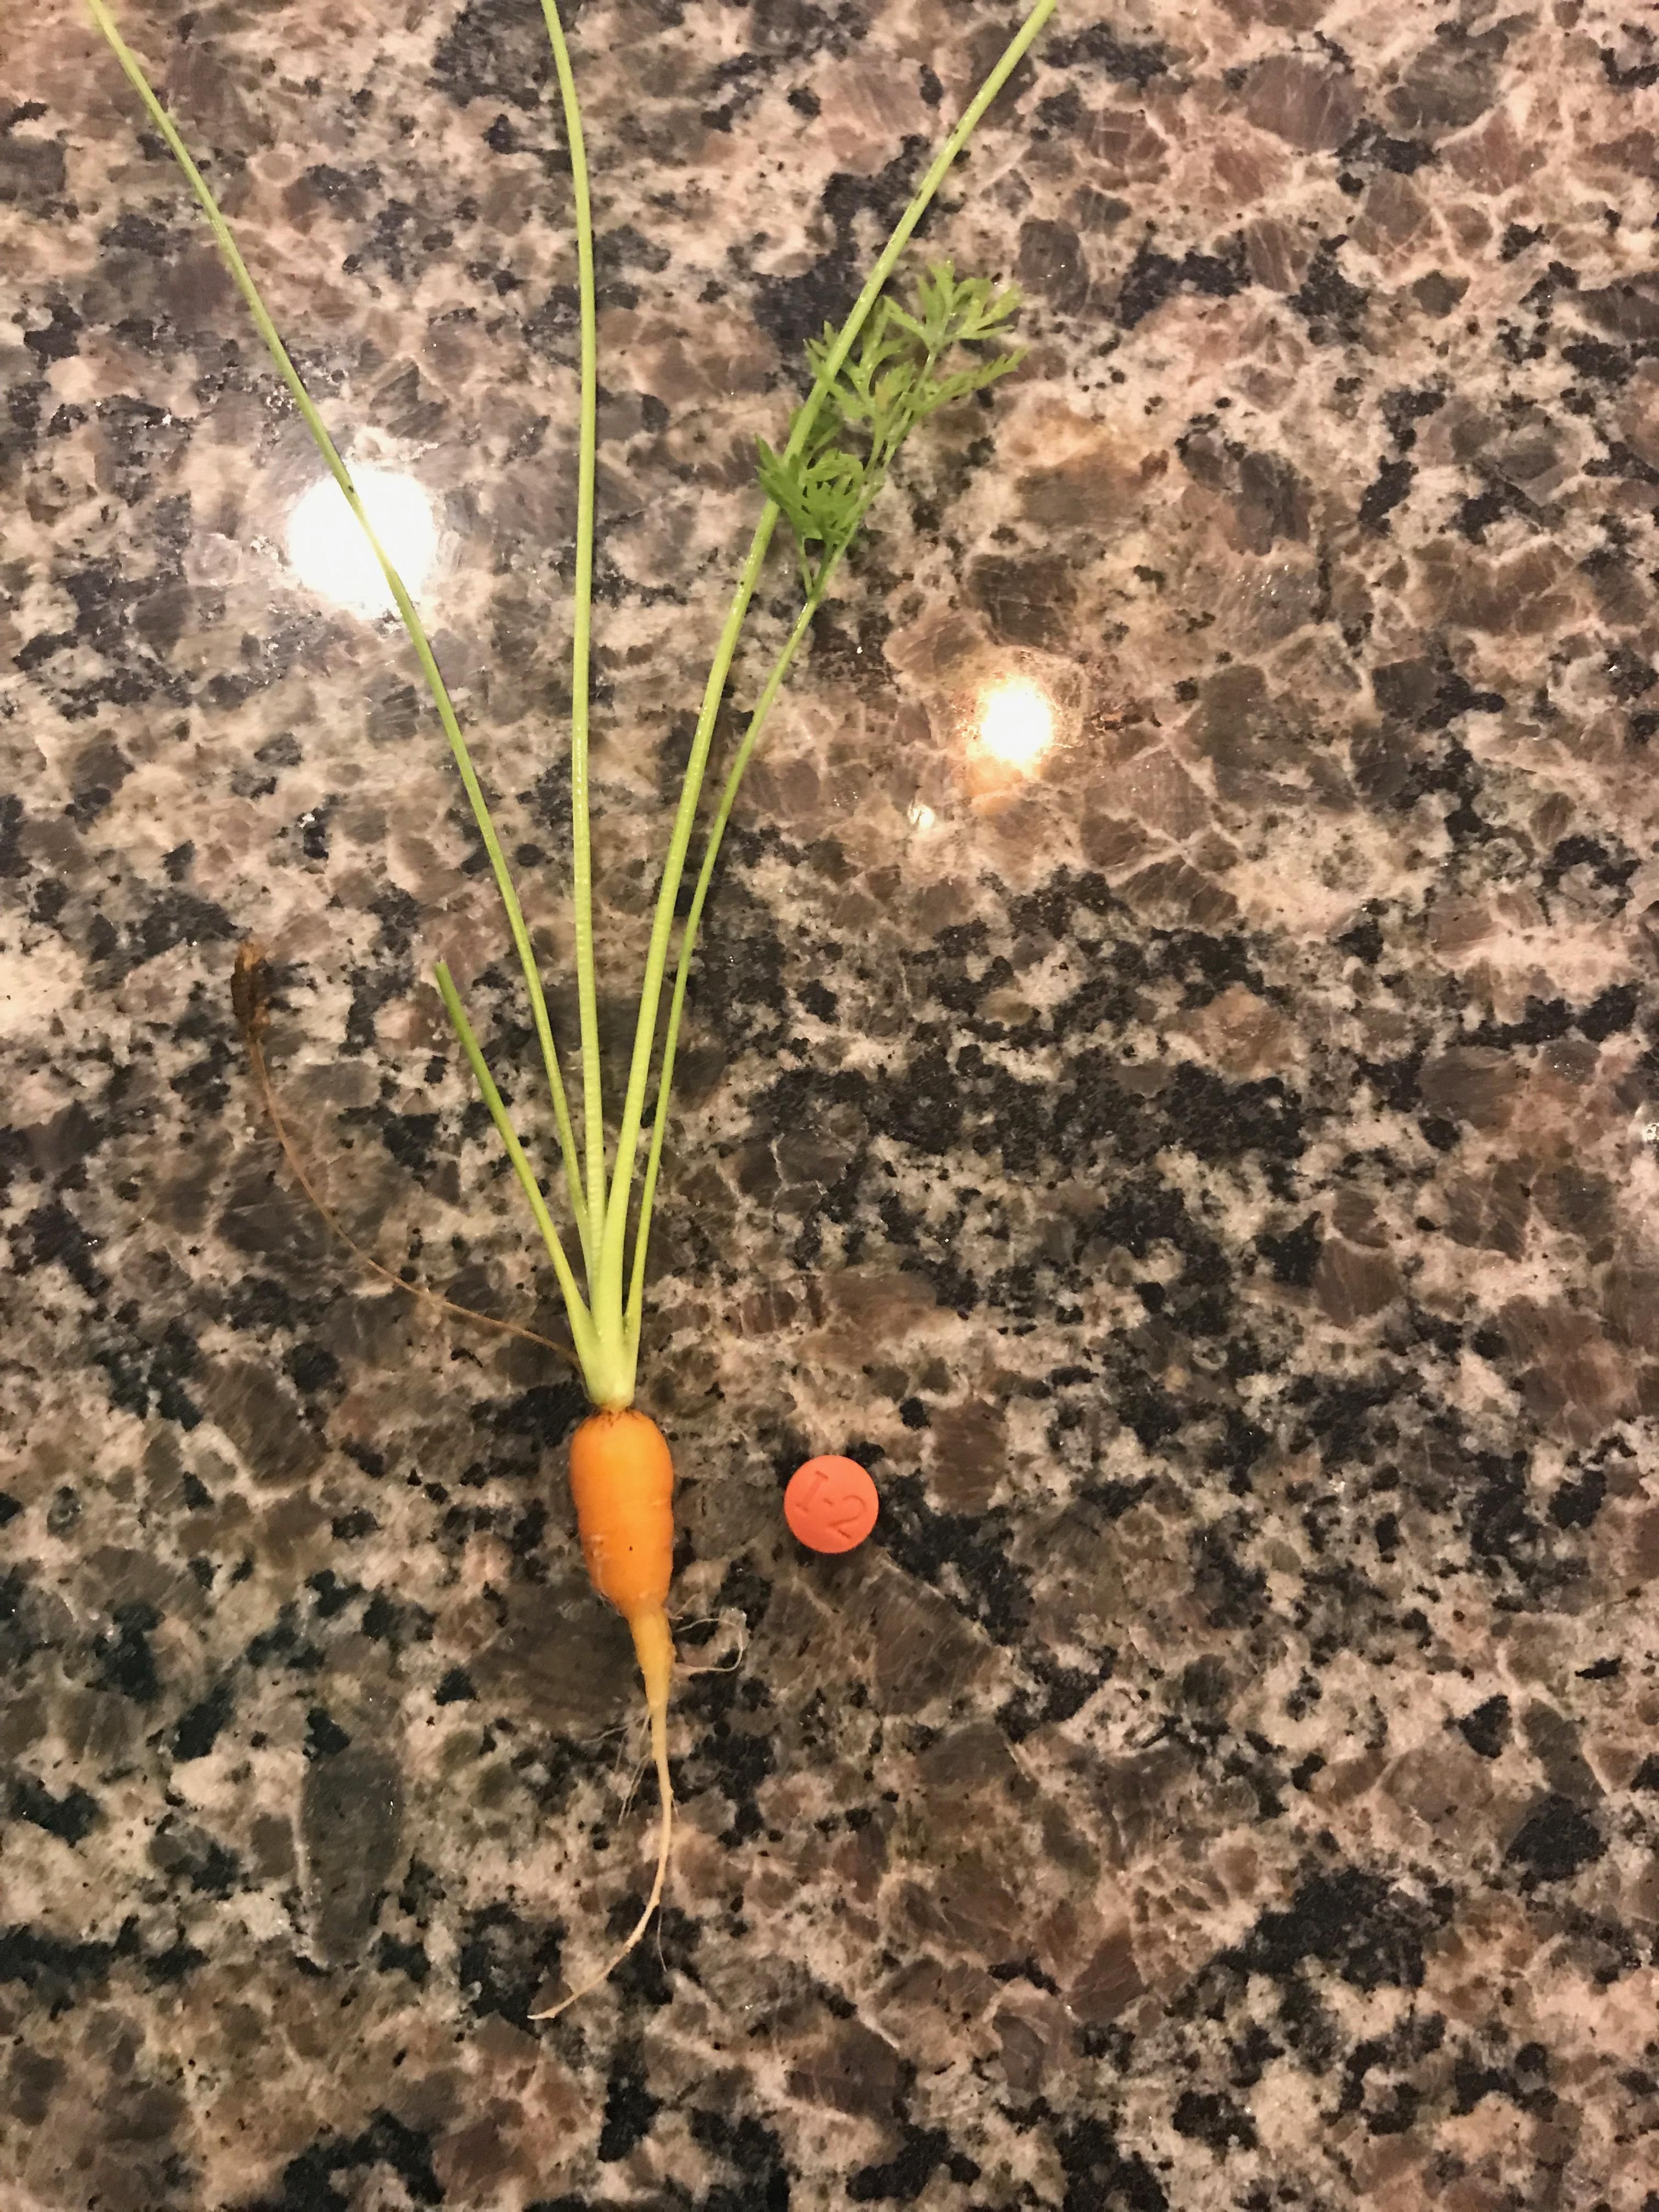 Built a garden for my wife a few months ago and it is finally time for the bountiful harvest. Tonight, we feast like kings.